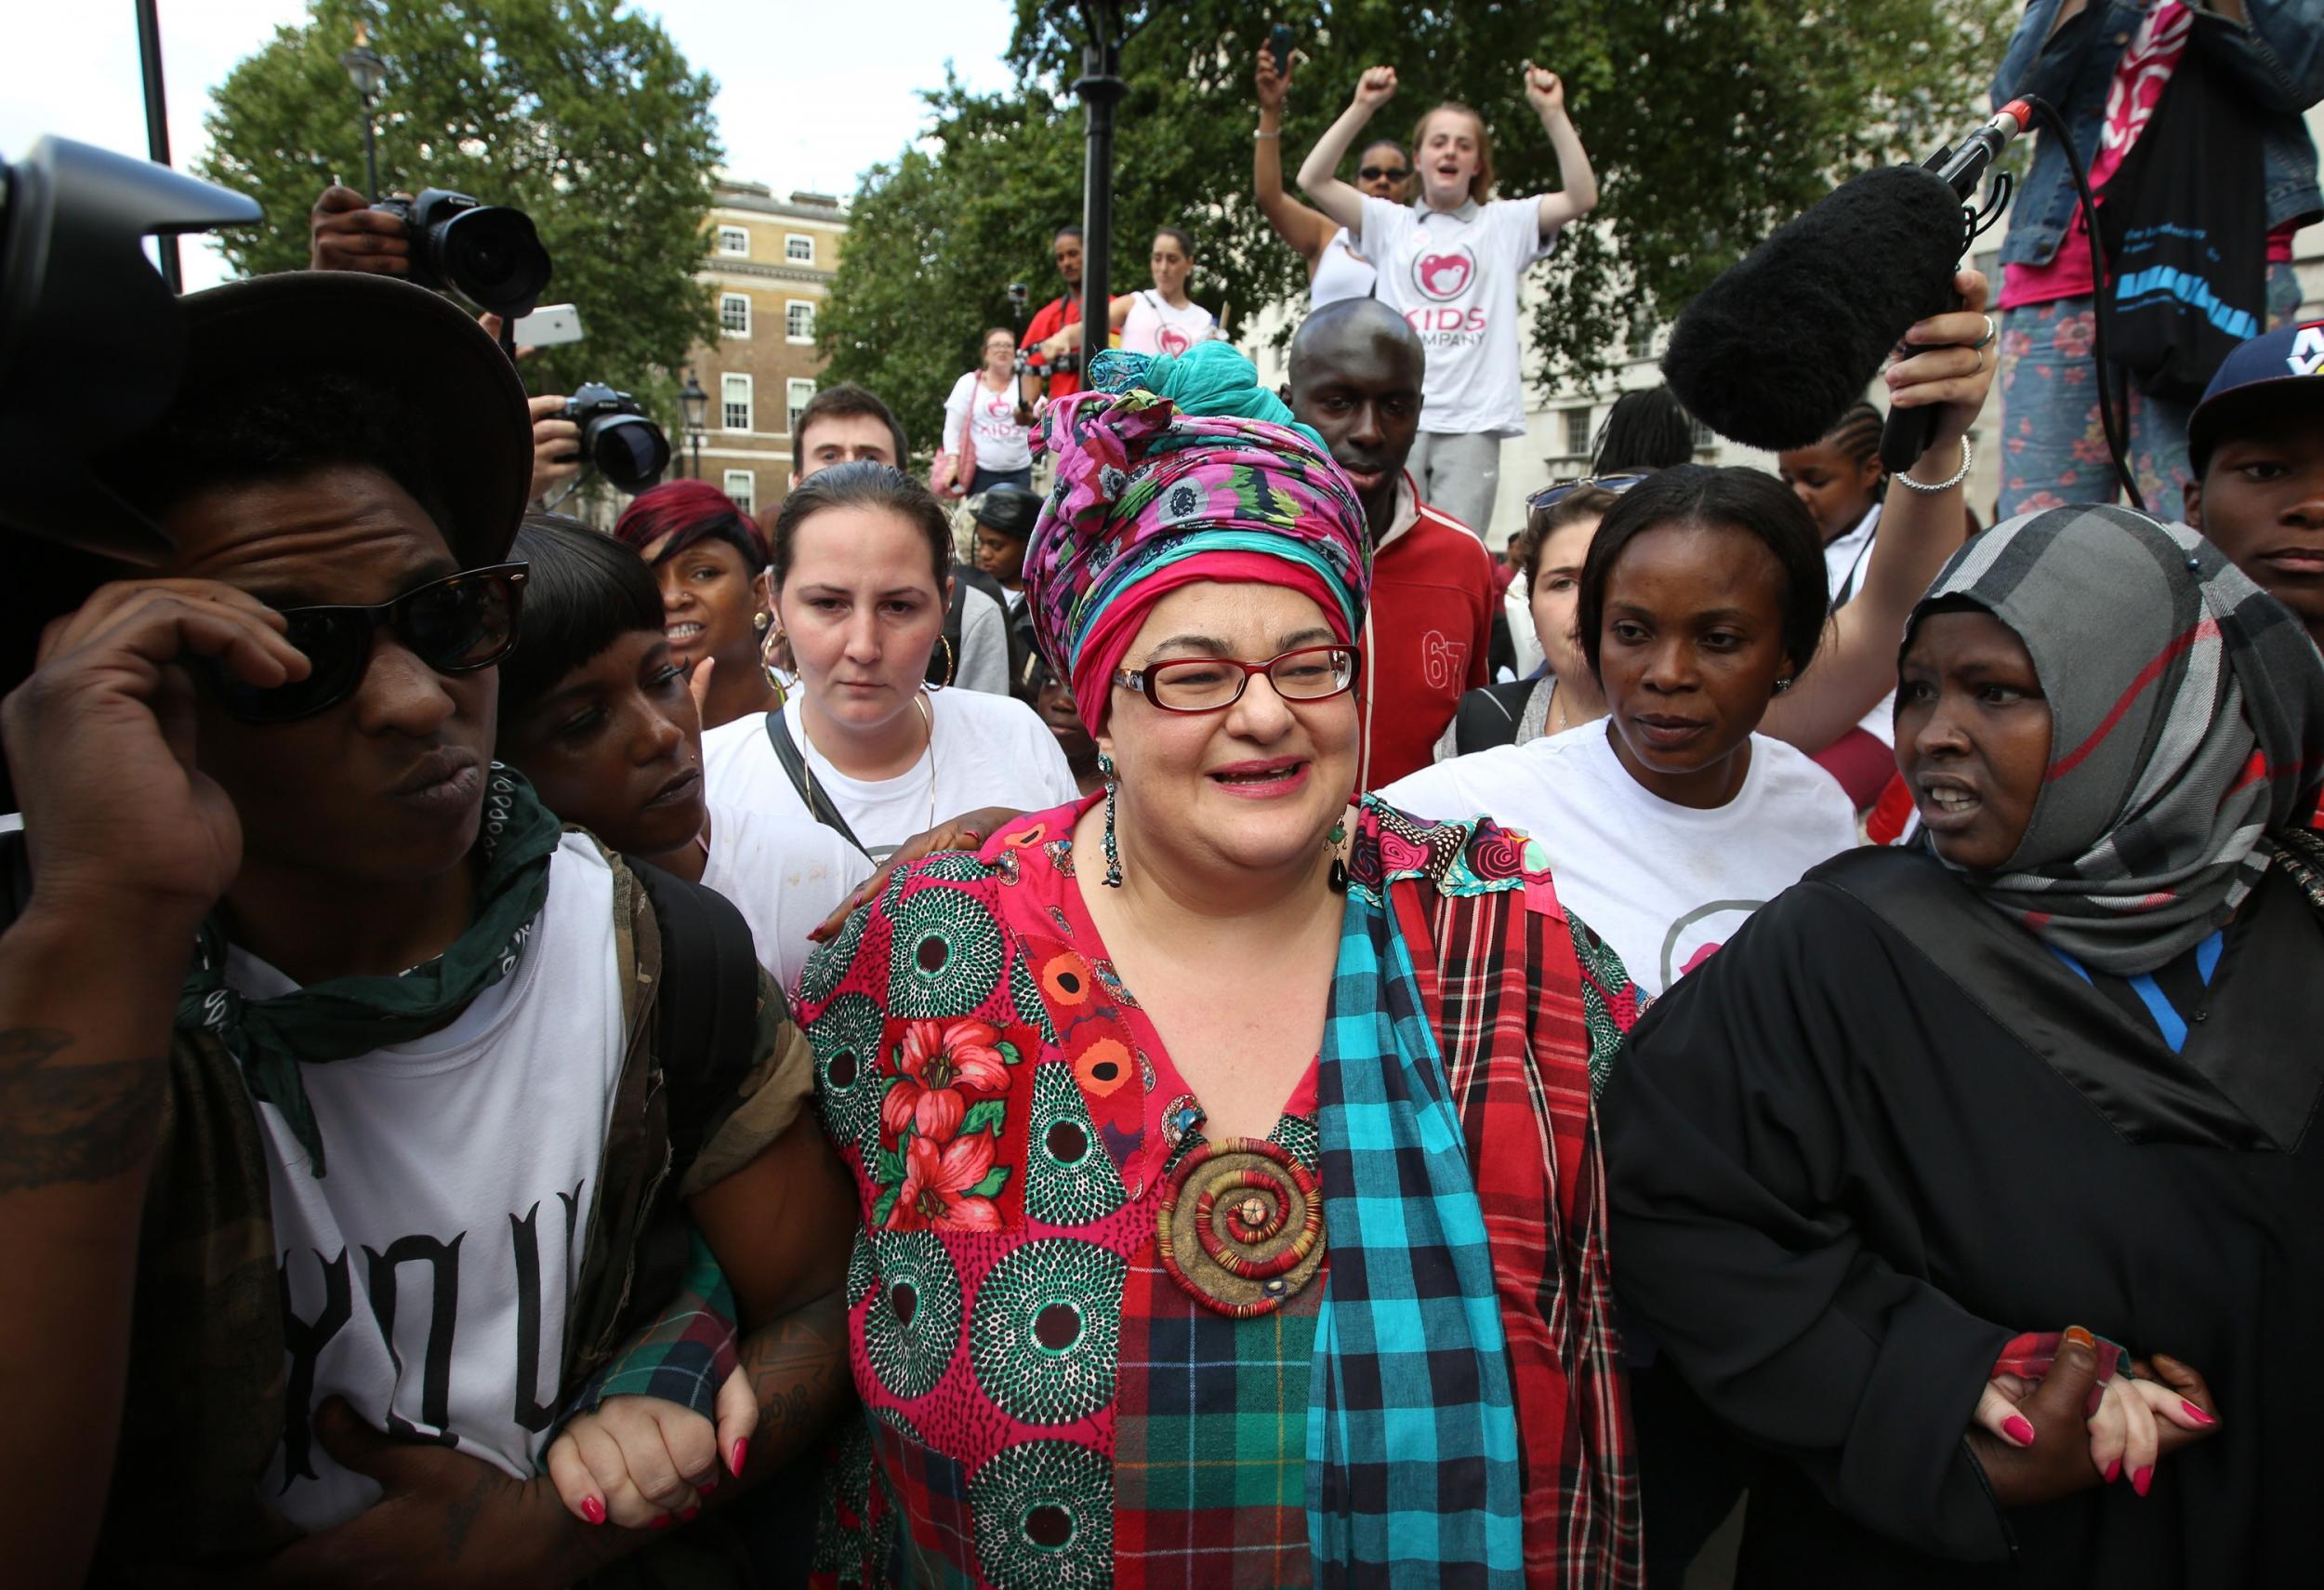 &#13;
Kids Company founder Camila Batmanghelidjh surrounded by supporters in August last year (PA)&#13;